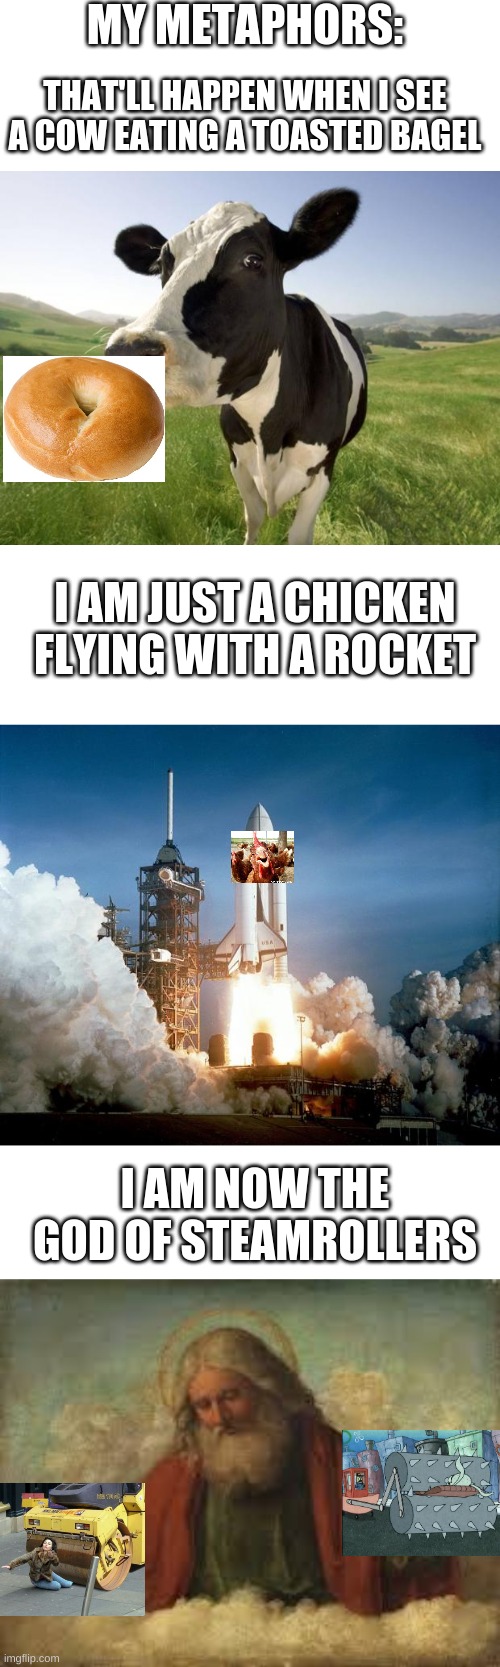 MY METAPHORS:; THAT'LL HAPPEN WHEN I SEE A COW EATING A TOASTED BAGEL; I AM JUST A CHICKEN FLYING WITH A ROCKET; I AM NOW THE GOD OF STEAMROLLERS | image tagged in blank white template,cow,rocket launch,god | made w/ Imgflip meme maker